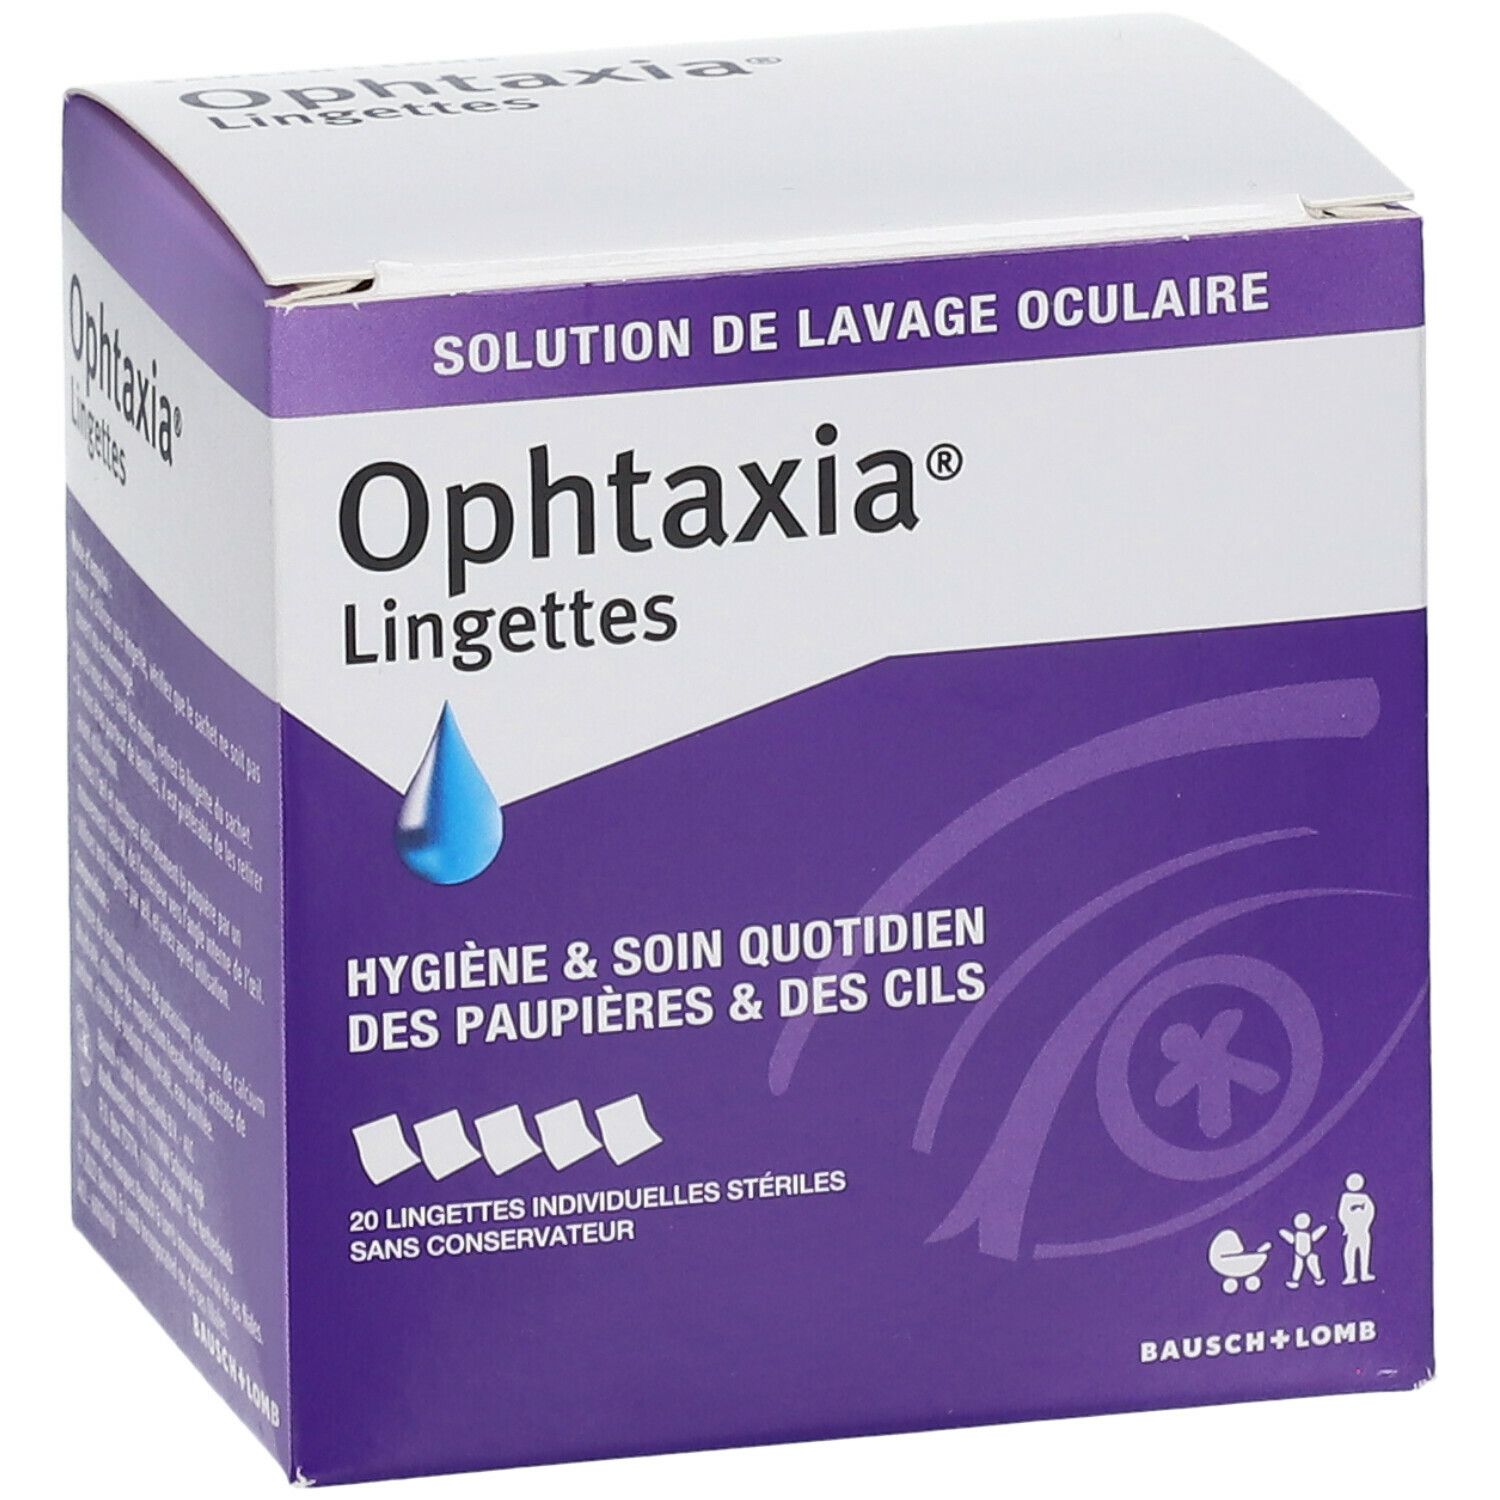 Ophtaxia® Lingettes